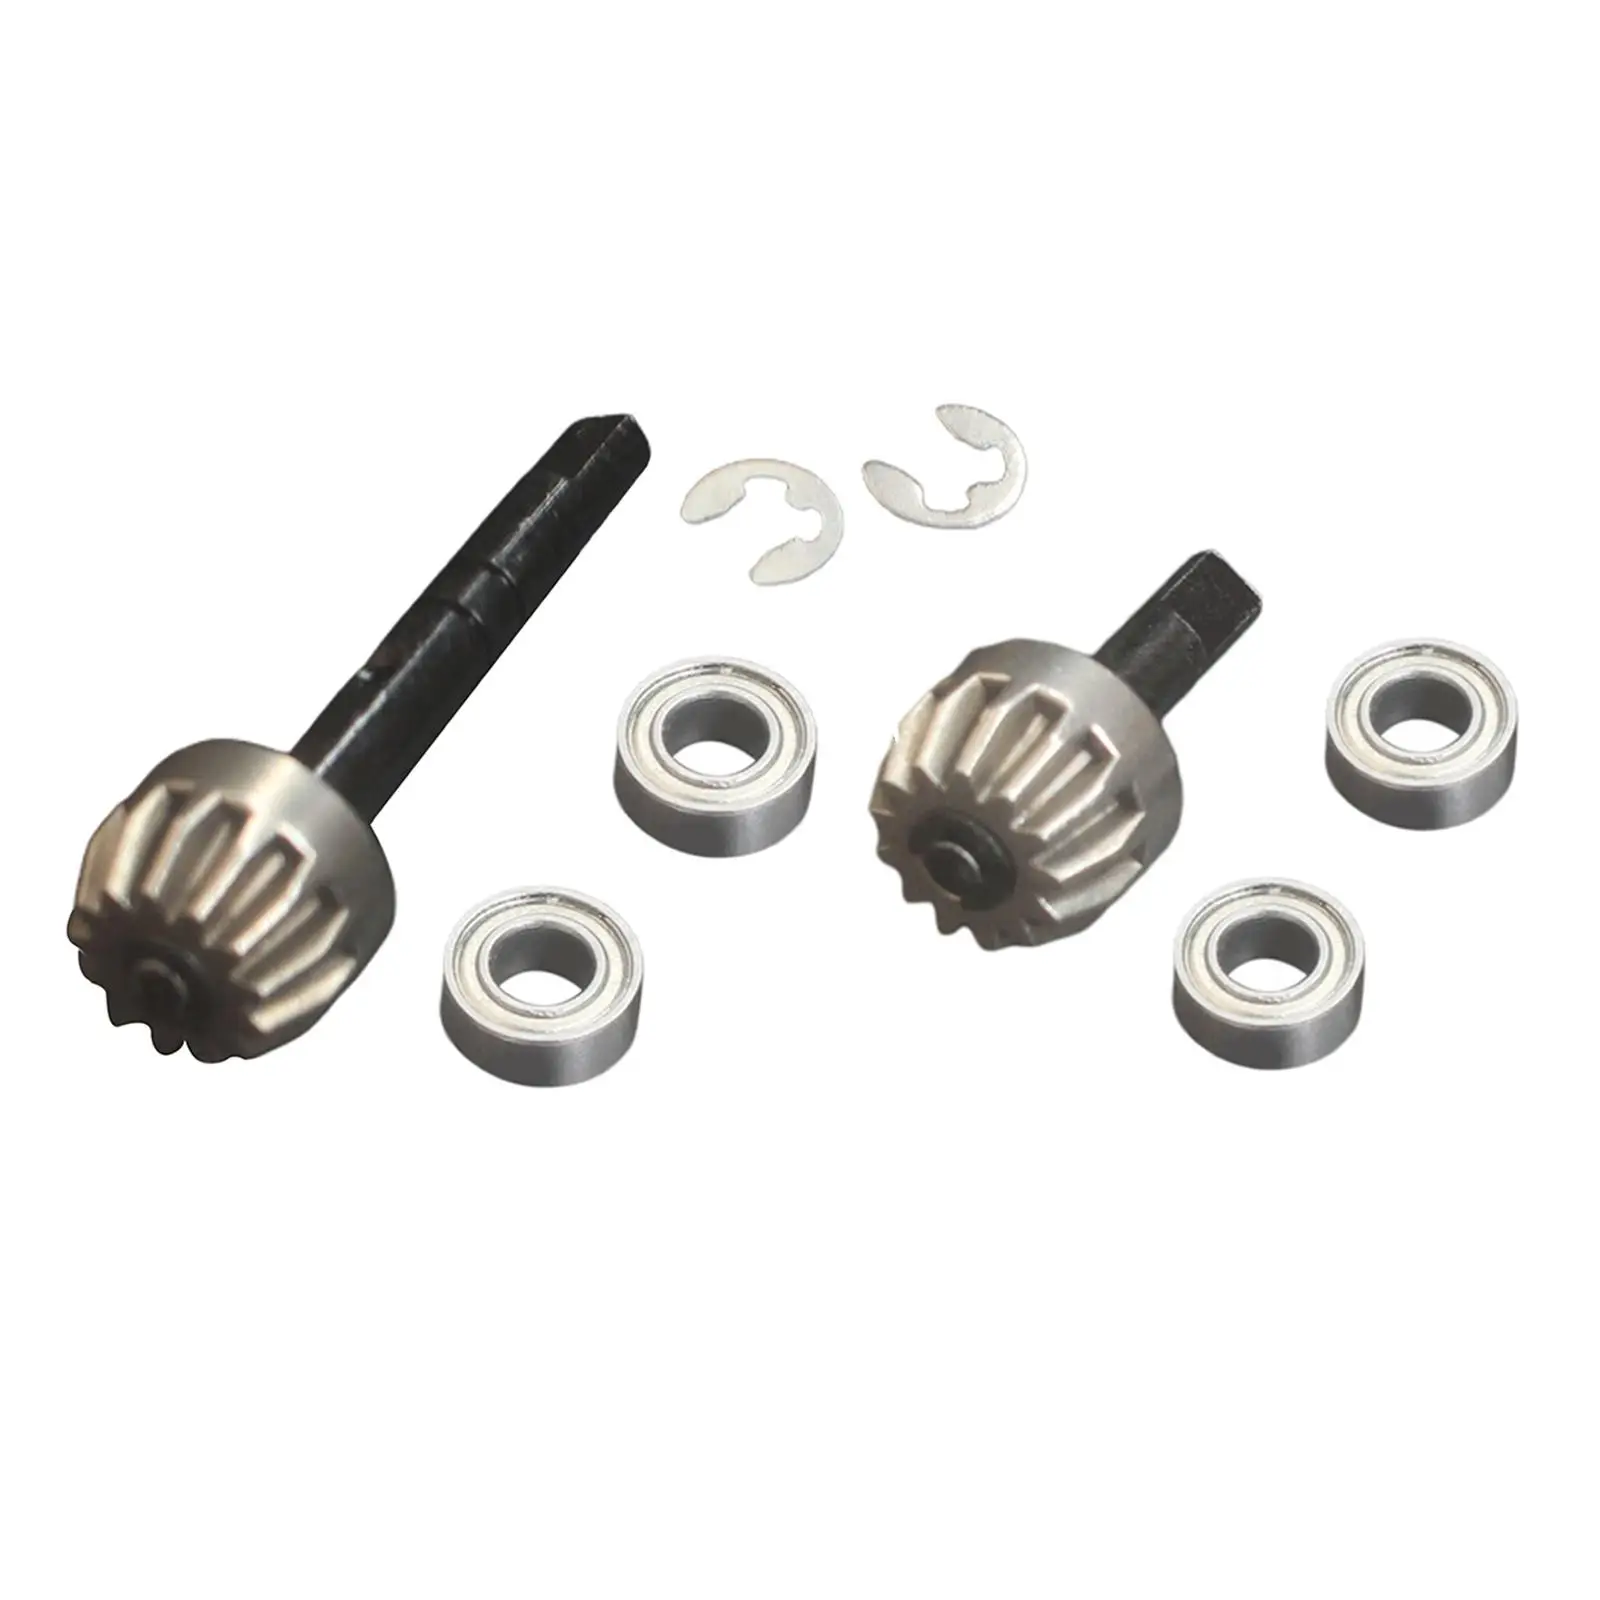 3/Set 13T Diff Gear +Bearings for HSP 94122 94123 94111 1:10 RC Crawler Accessory